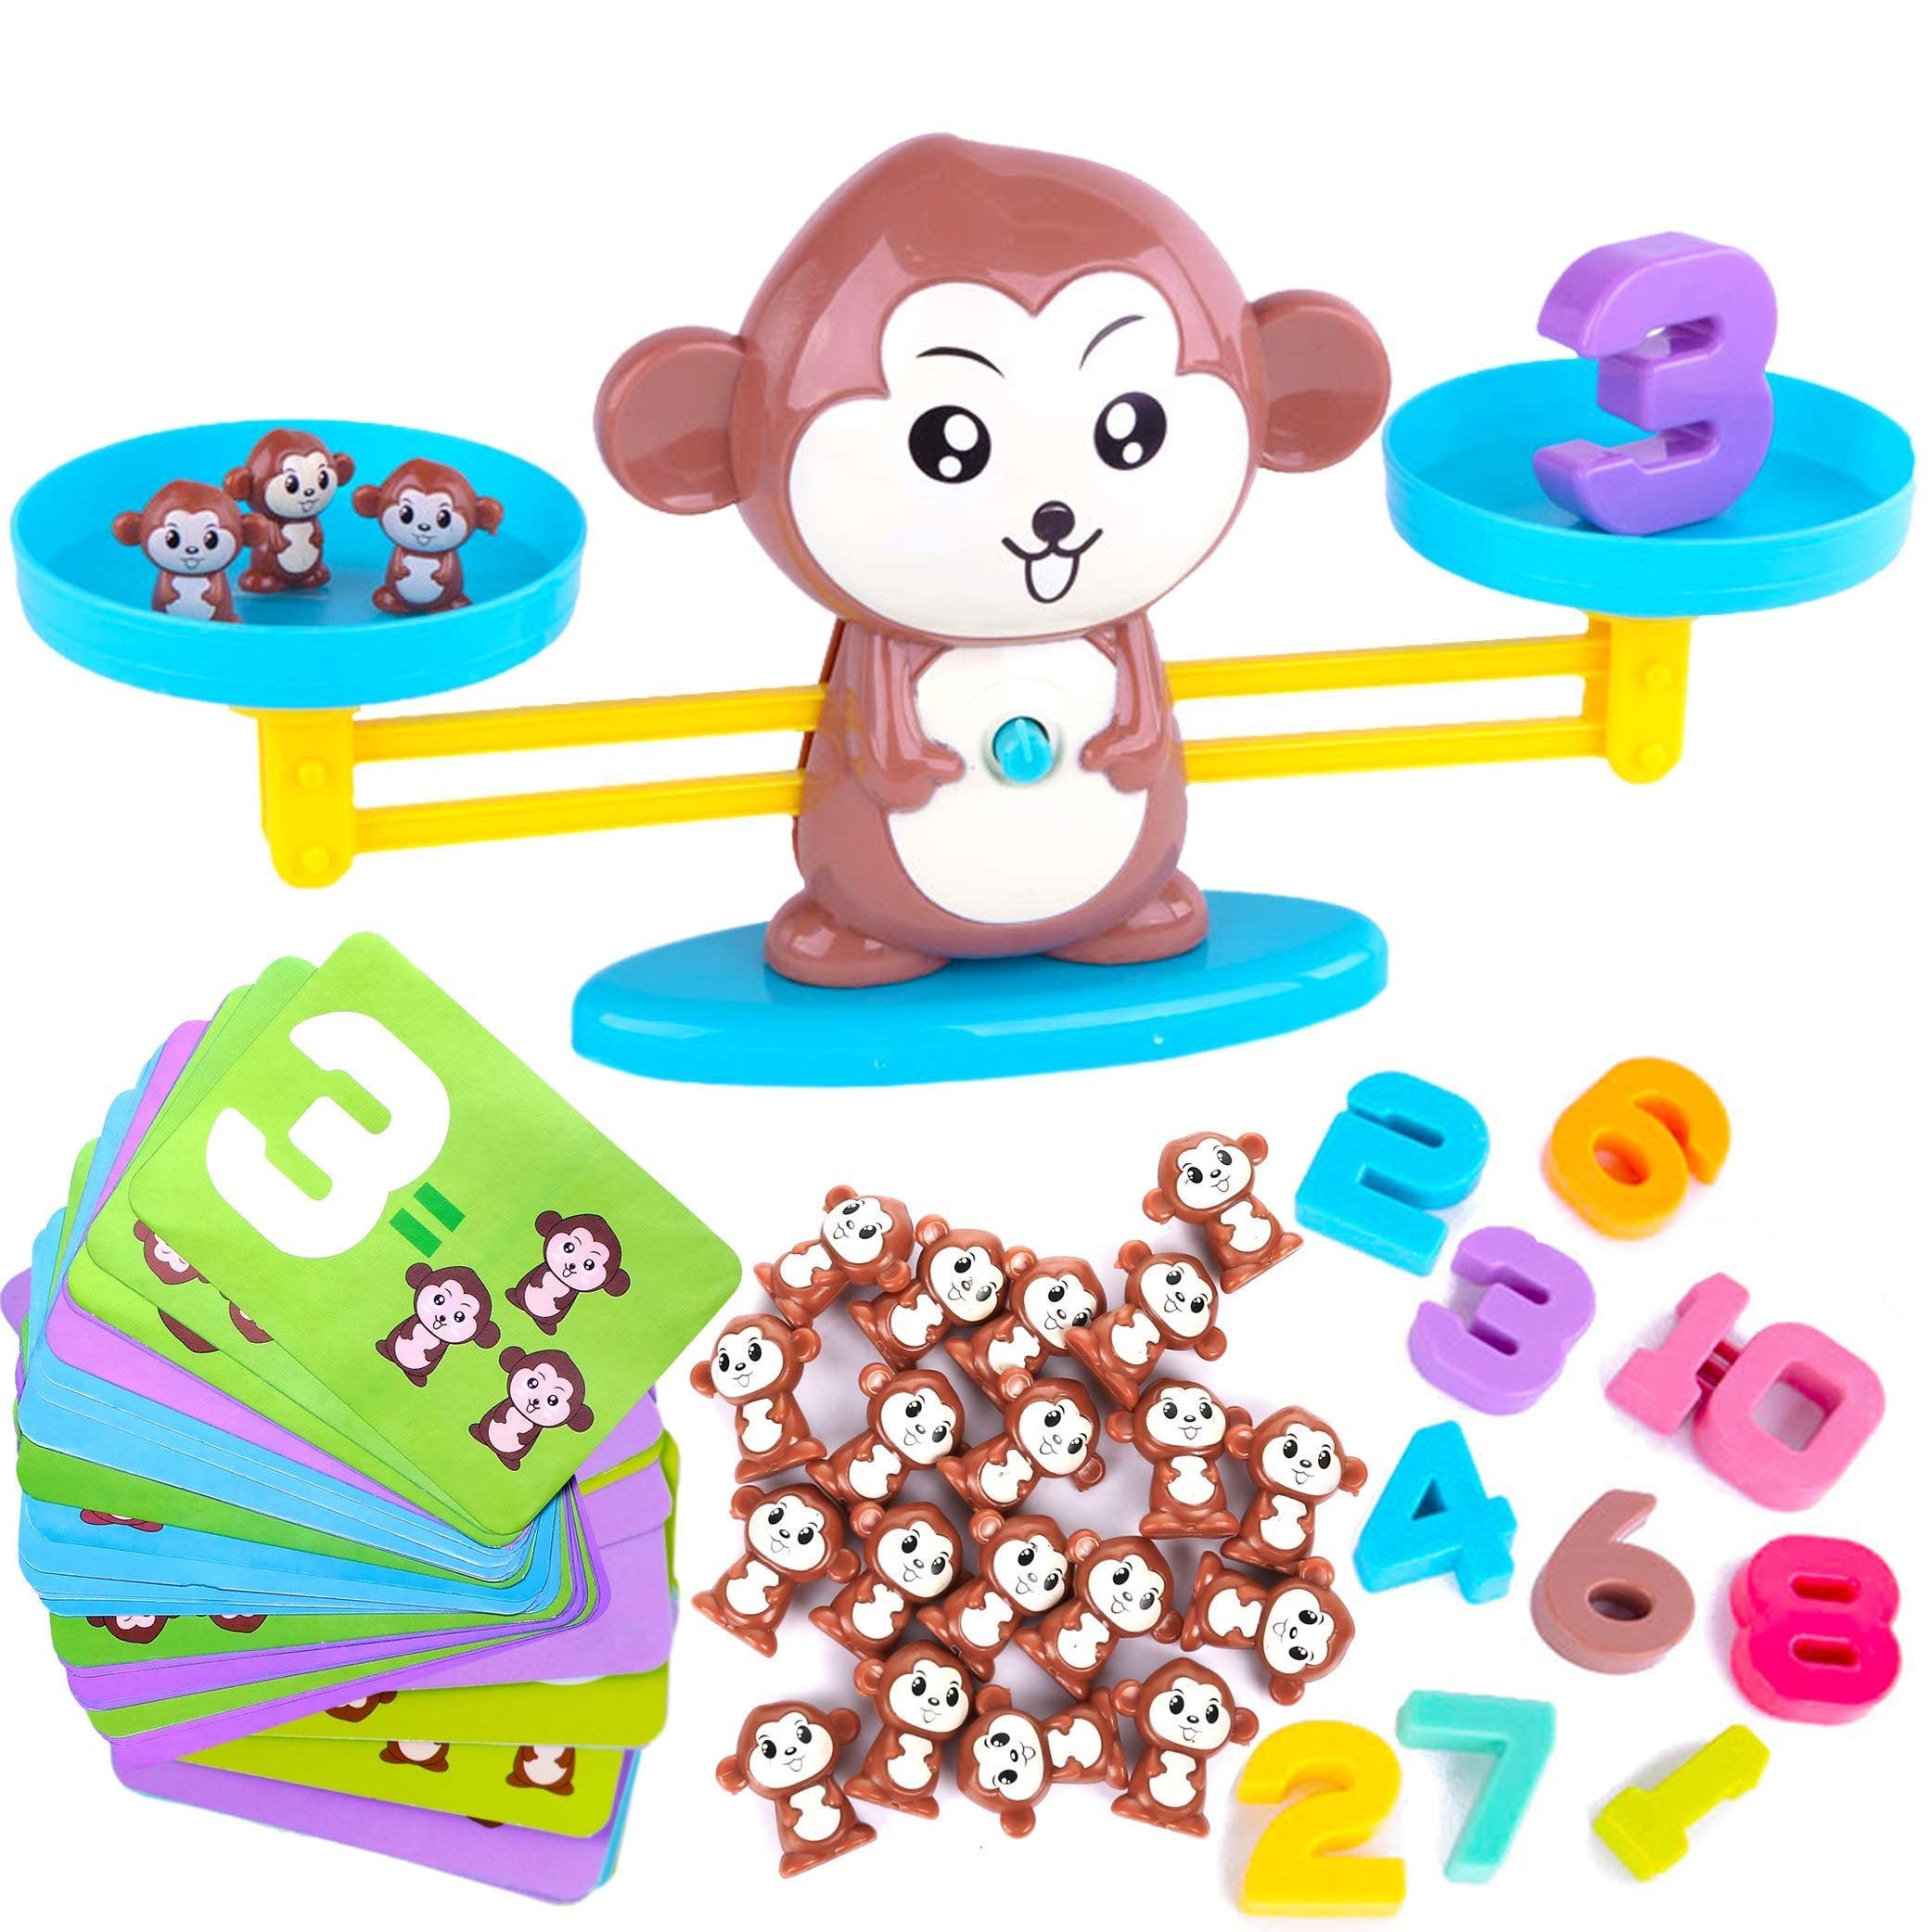 CoolToys Monkey Balance Cool Math Game for Girls & Boys | Fun, Educational Children's Gift & Kids Toy STEM Learning Ages 3+ (64-Piece Set)